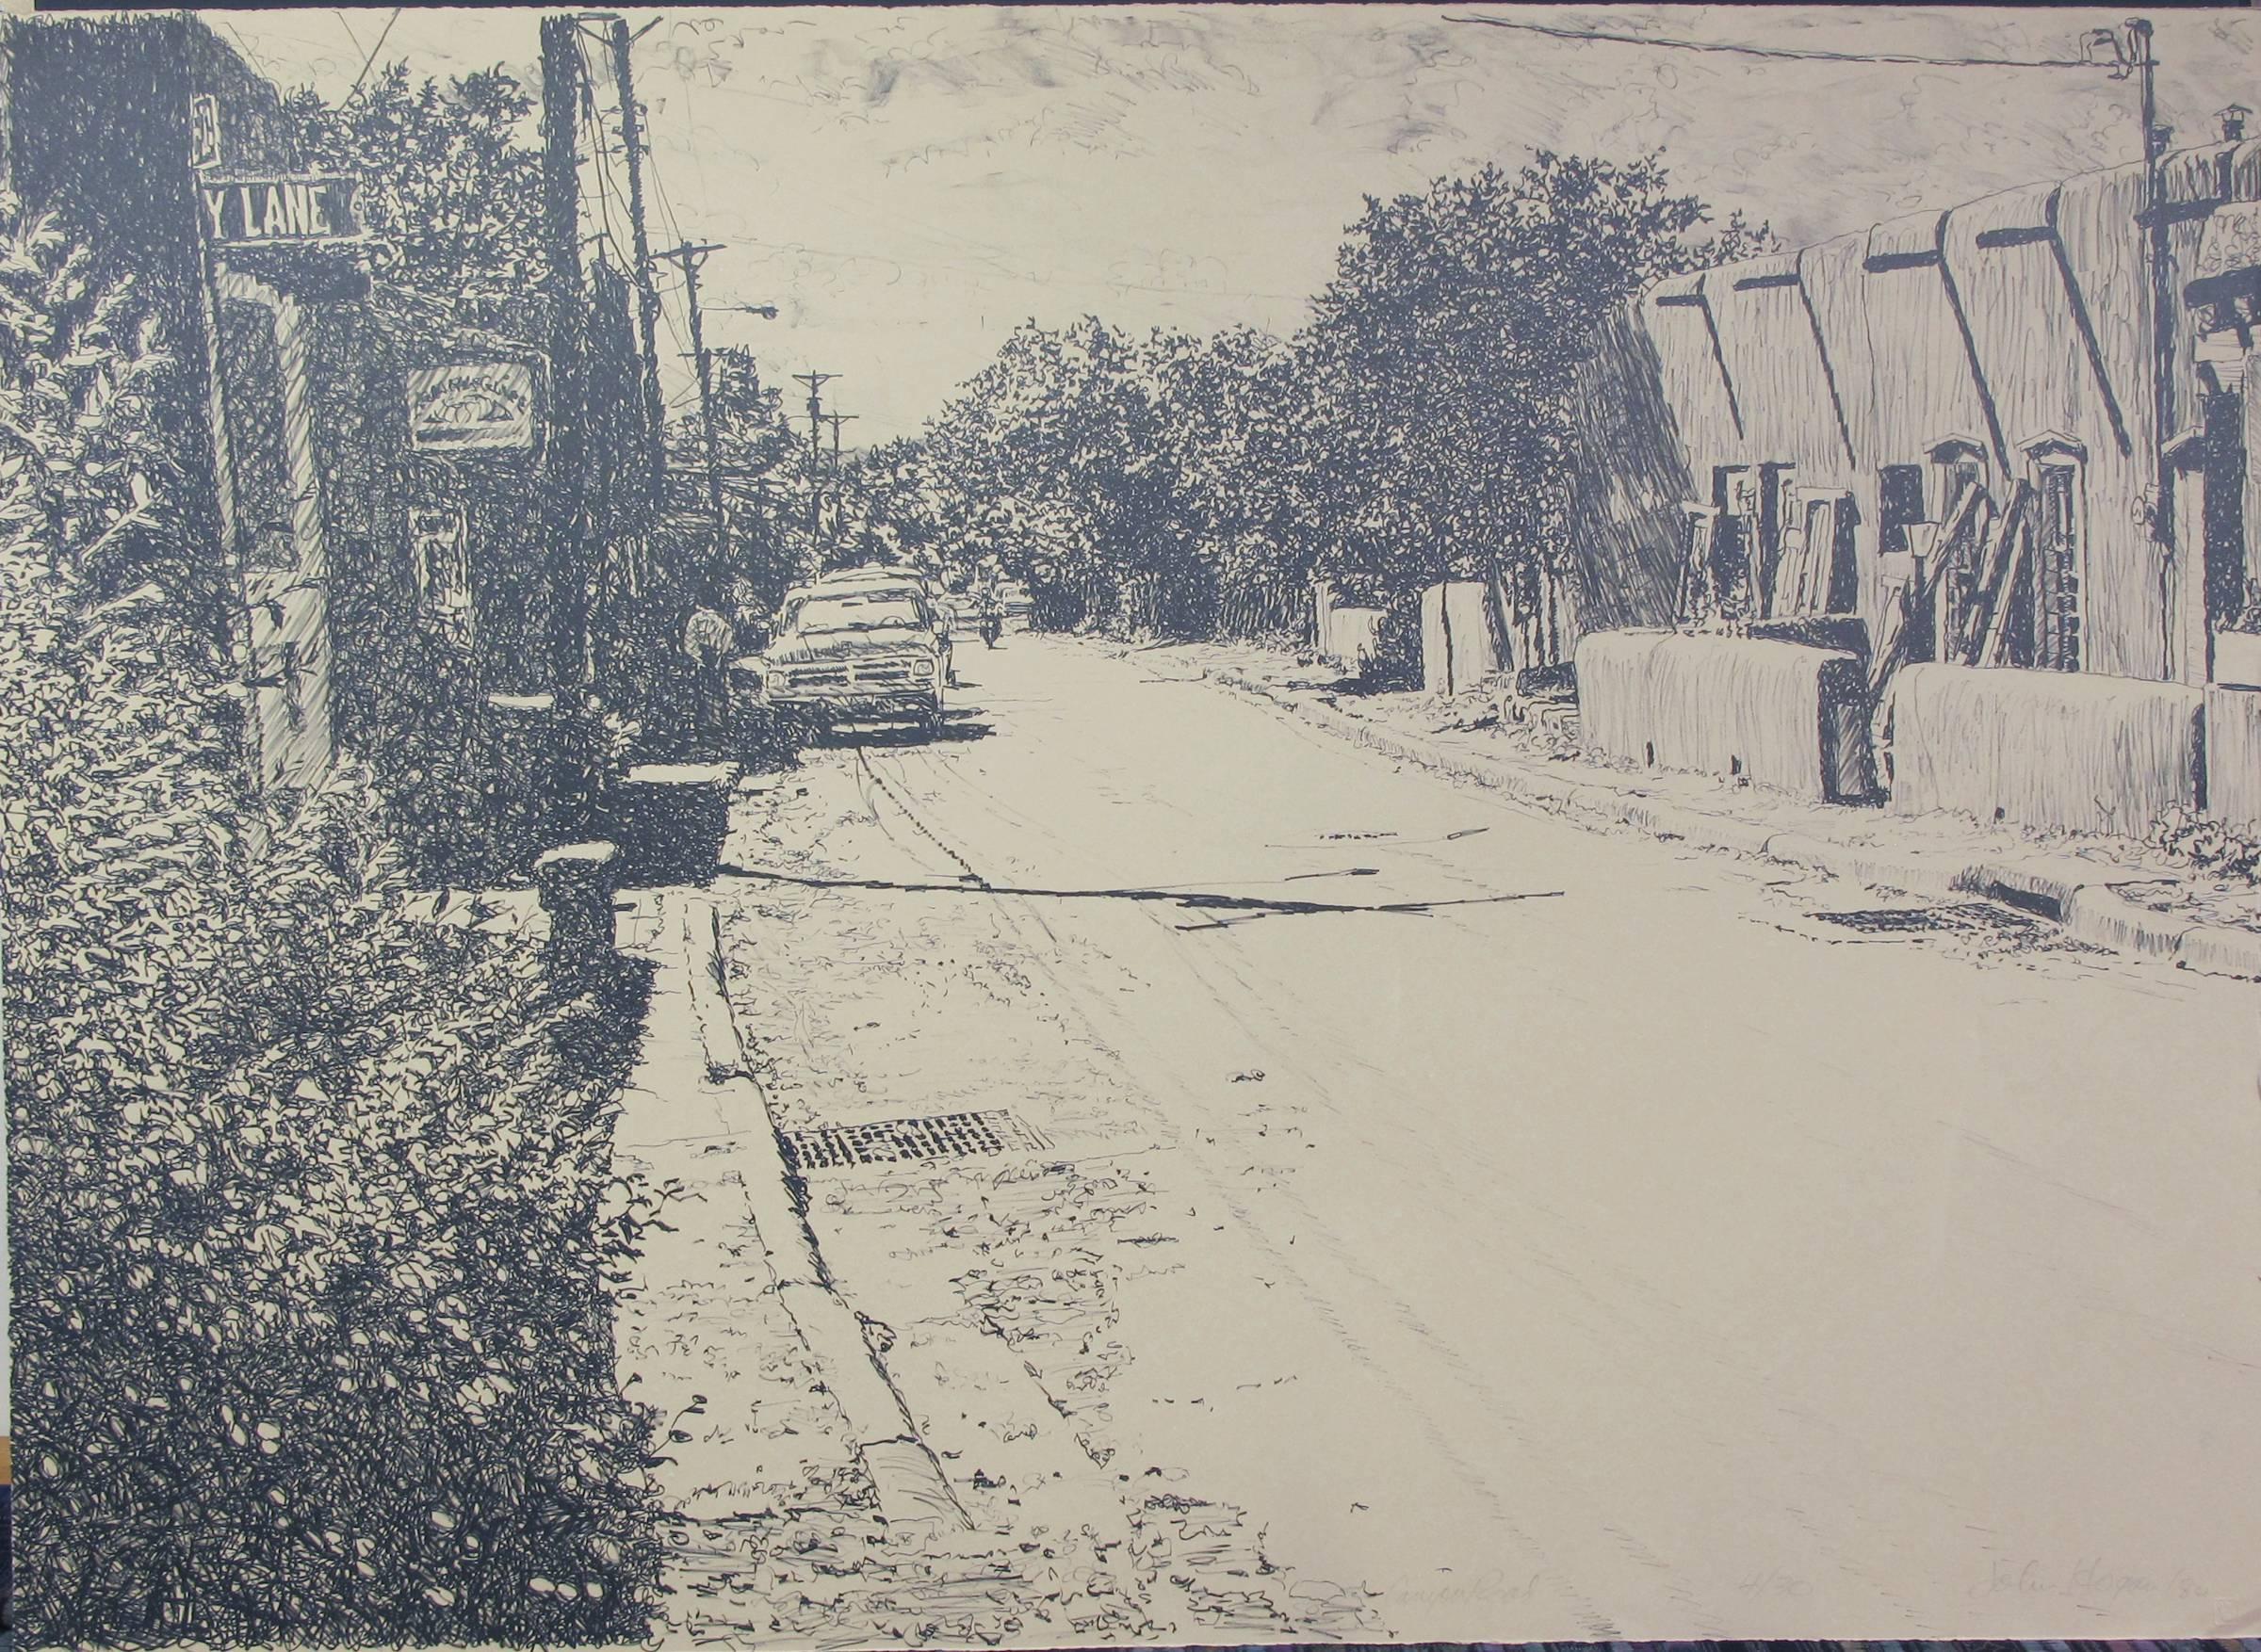 Canyon Road, by John Hogan, lithograph, edition, black, white, Santa Fe
hand pulled lithograph edition signed and numbered by the artist
unframed
30 x 44 paper size

John Hogan  A graduate of Northeast Louisiana State University with a bachelor's